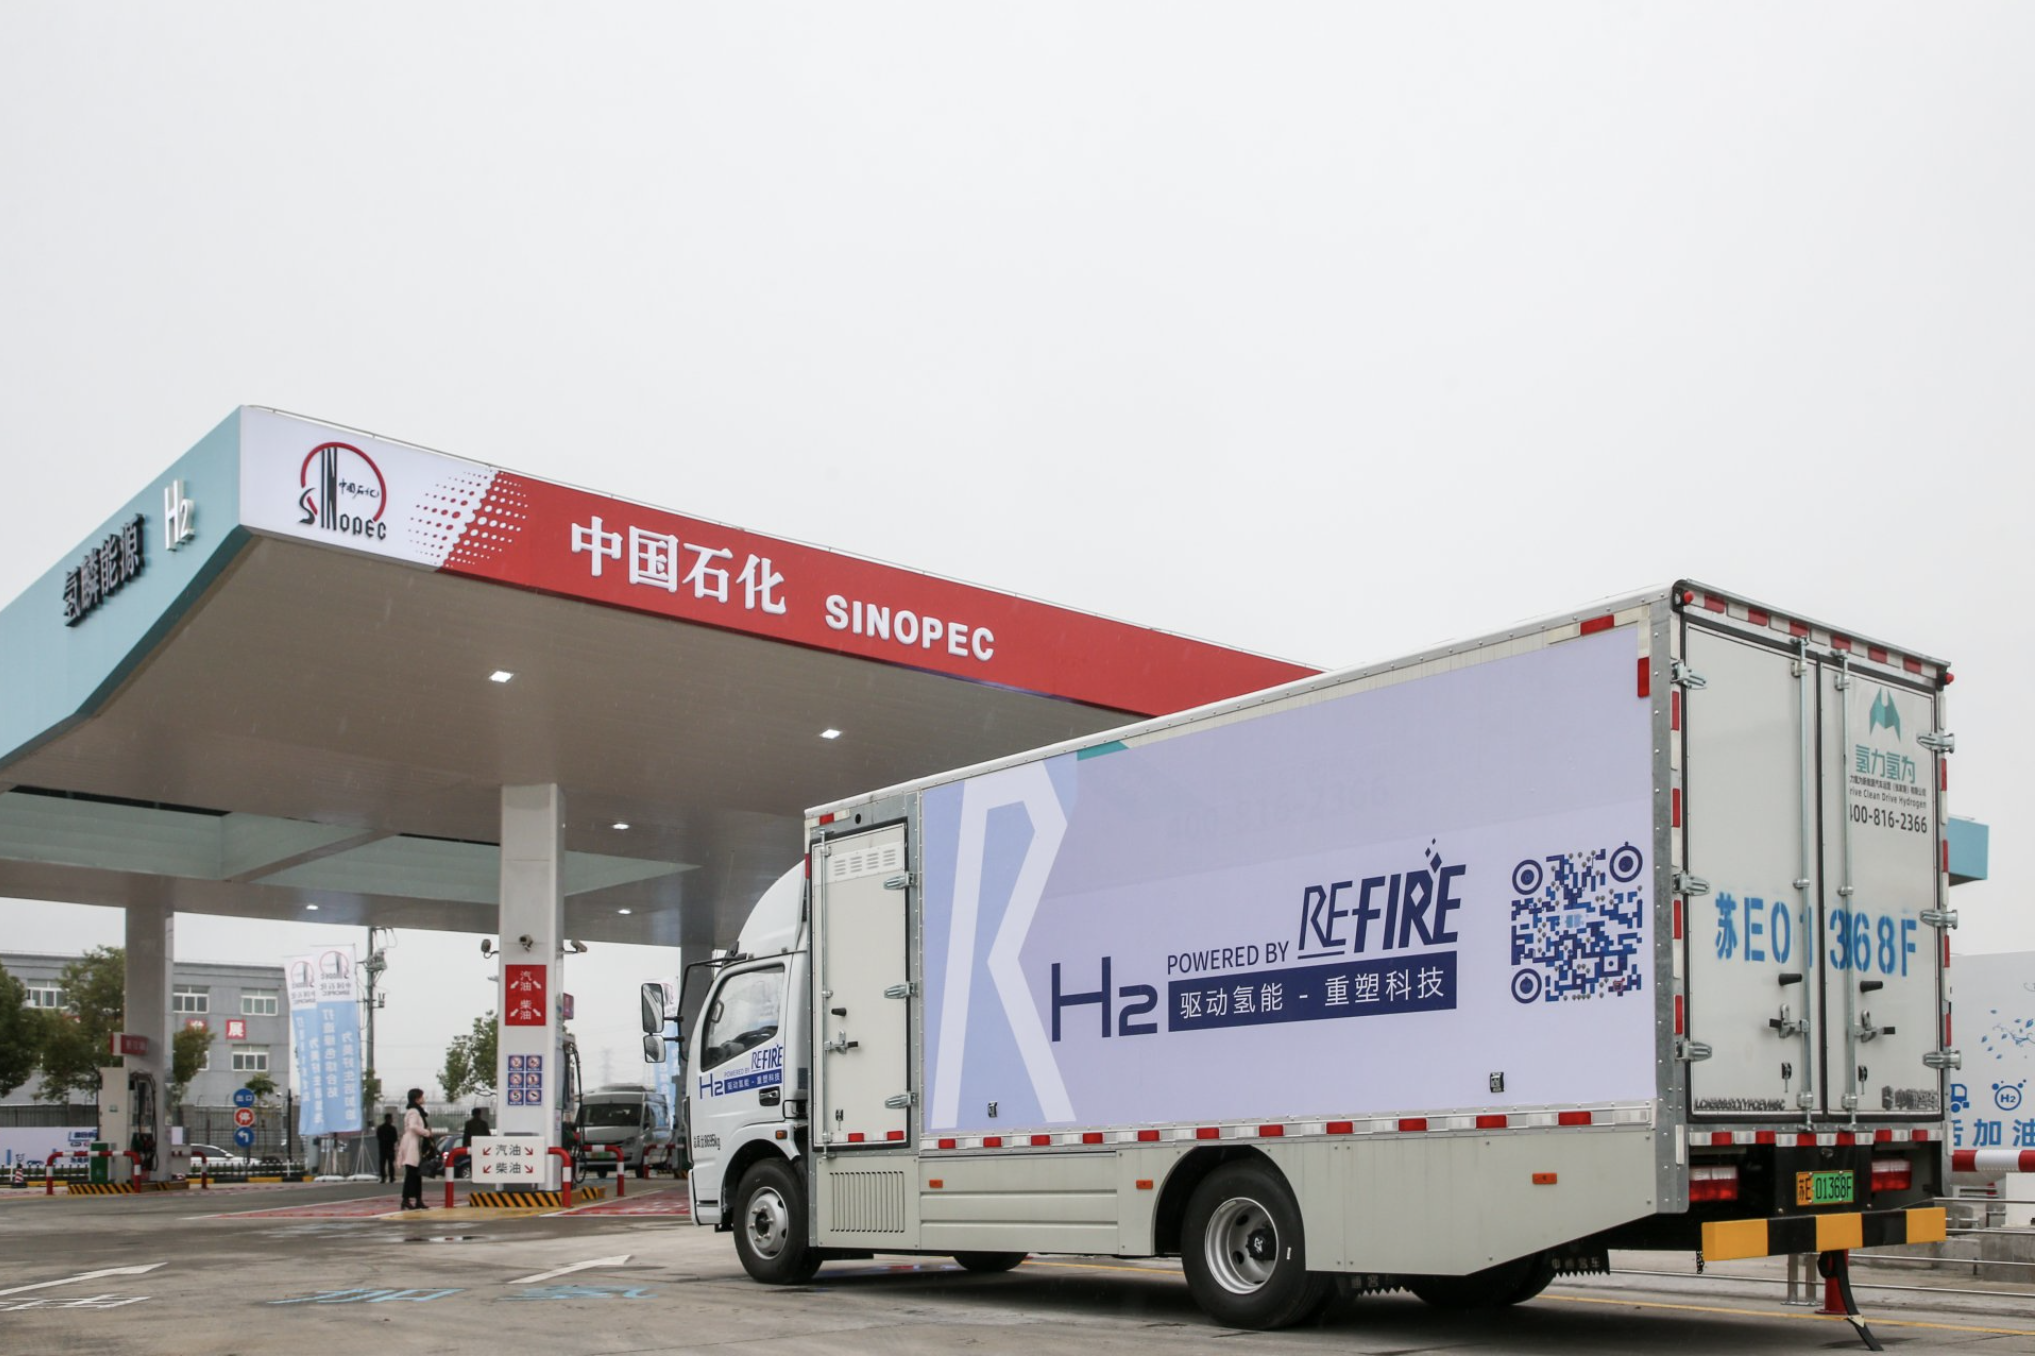 2021/04 Sinopec intends to build 1000 hydrogen gas stations until 2025